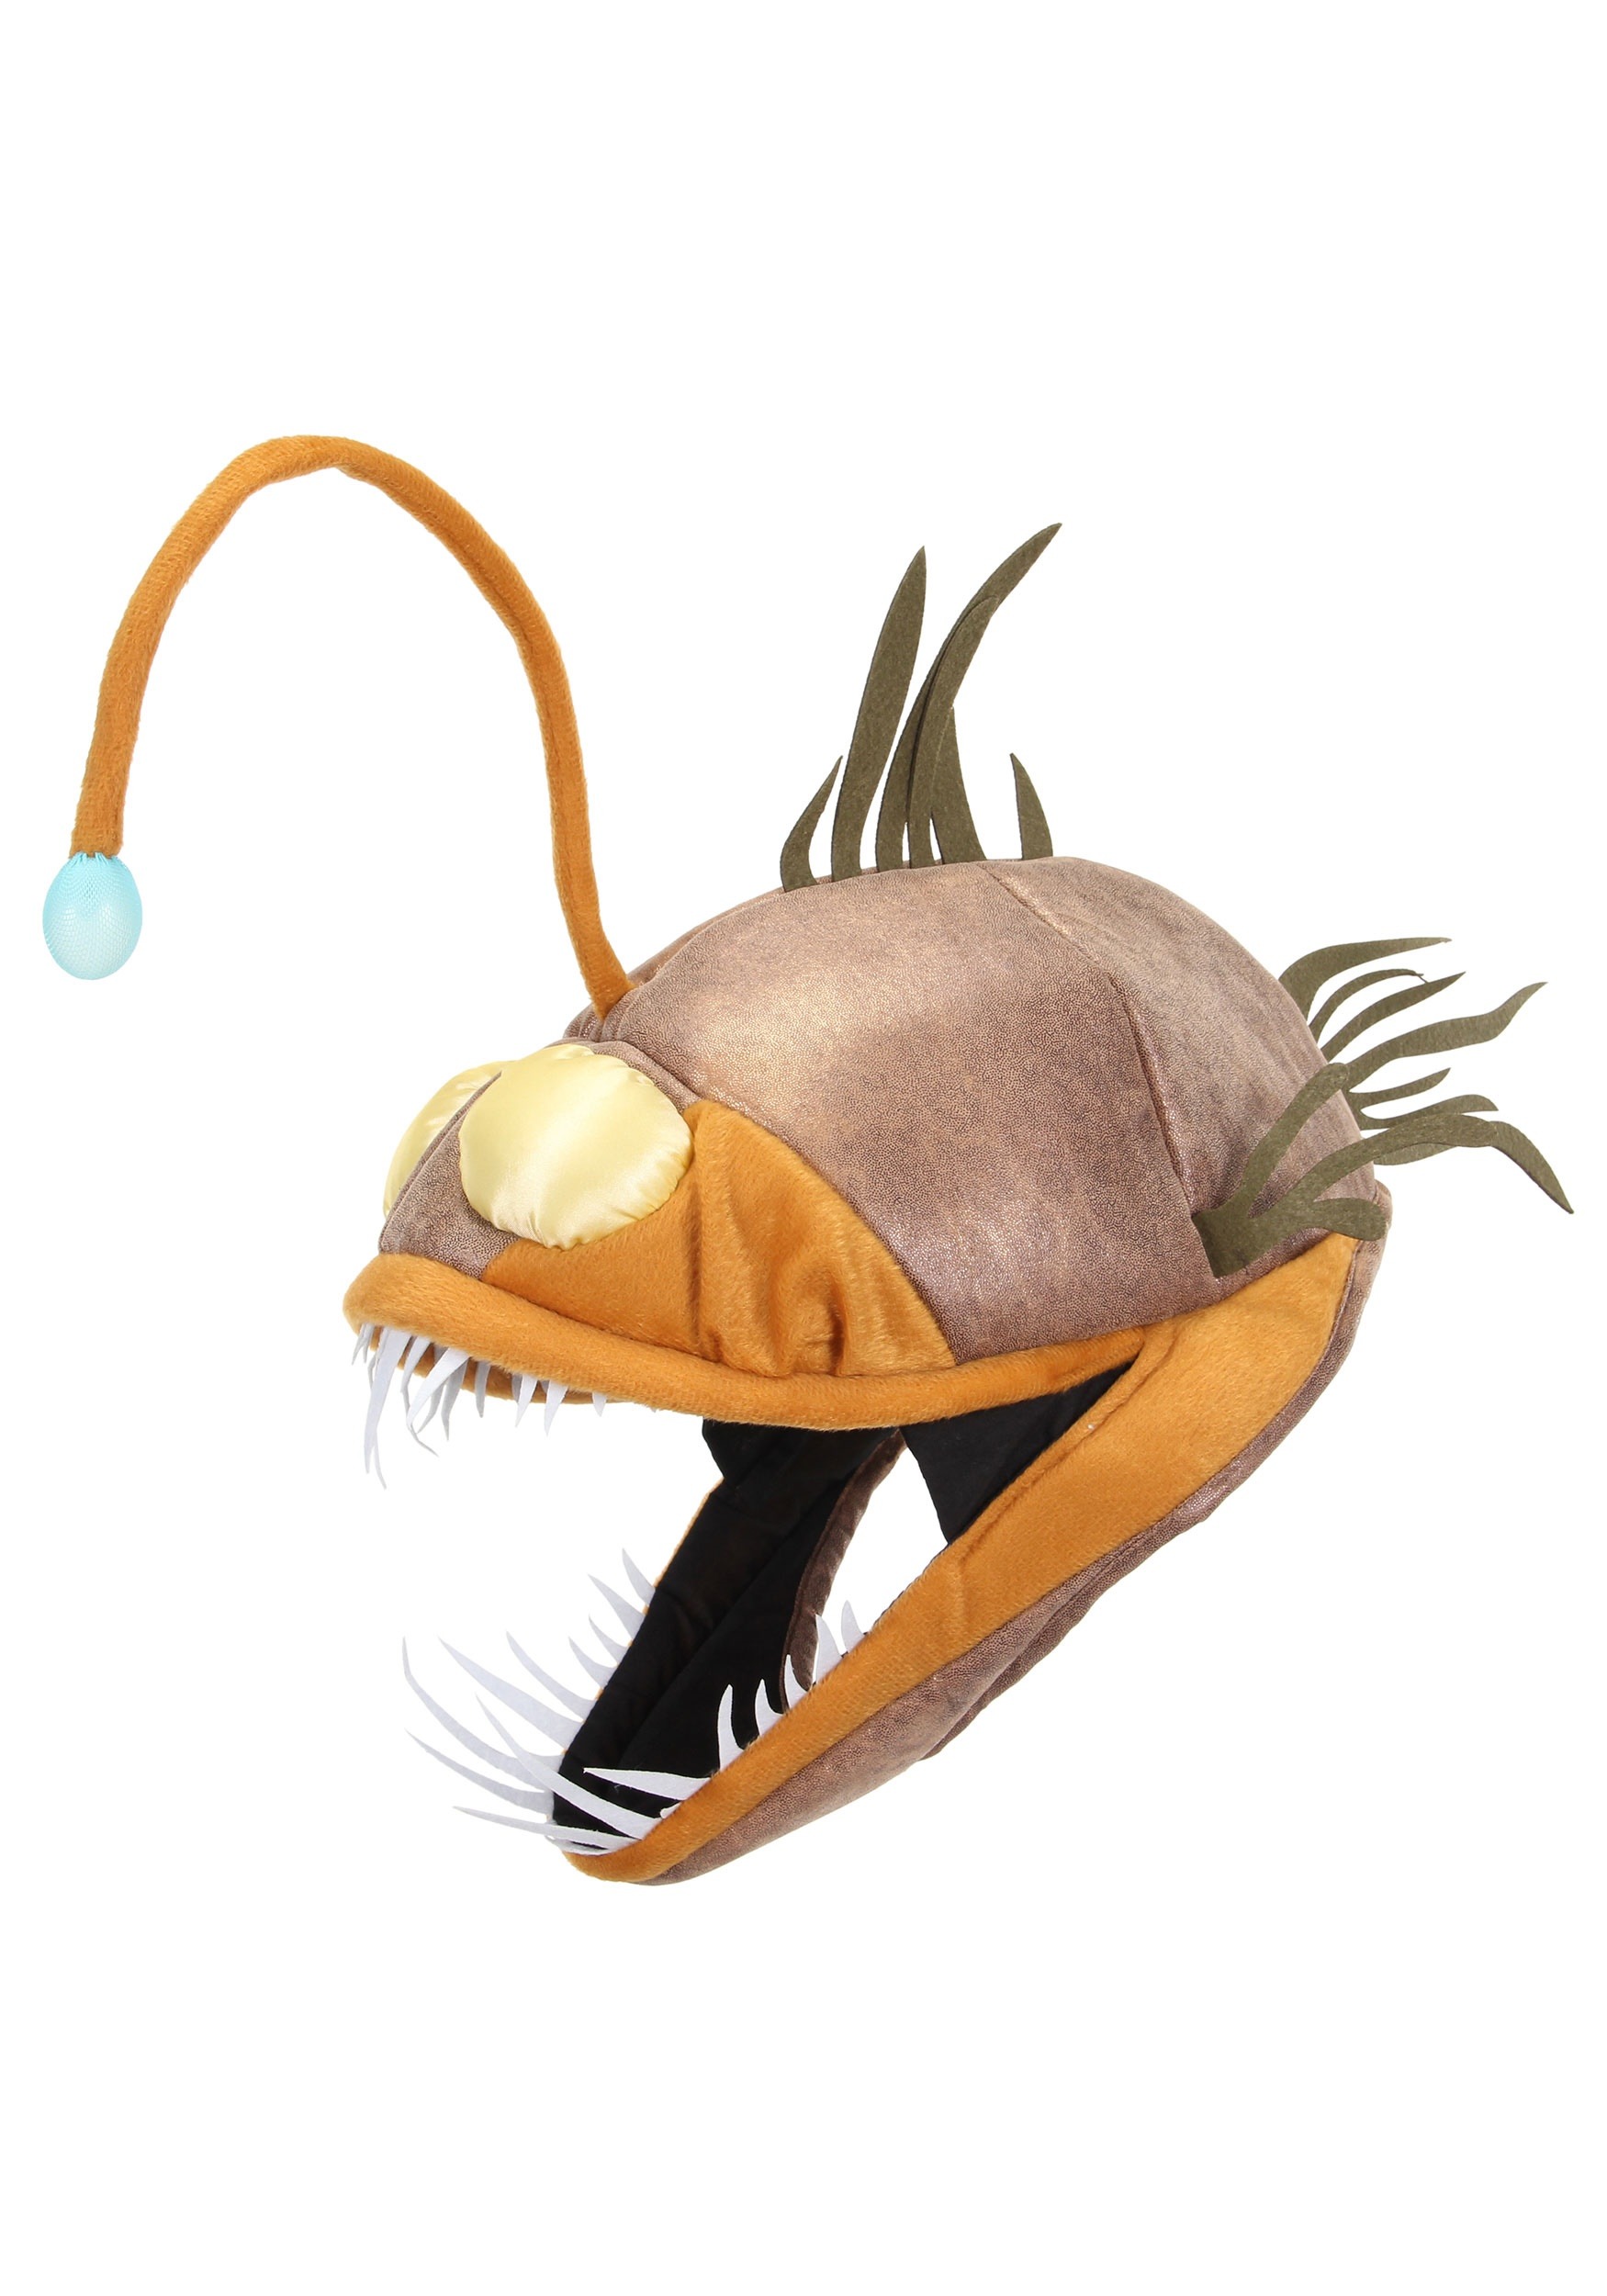 https://images.halloweencostumes.ca/products/41711/2-1-78786/light-up-angler-fish-jawesome-hat-alt-2.jpg